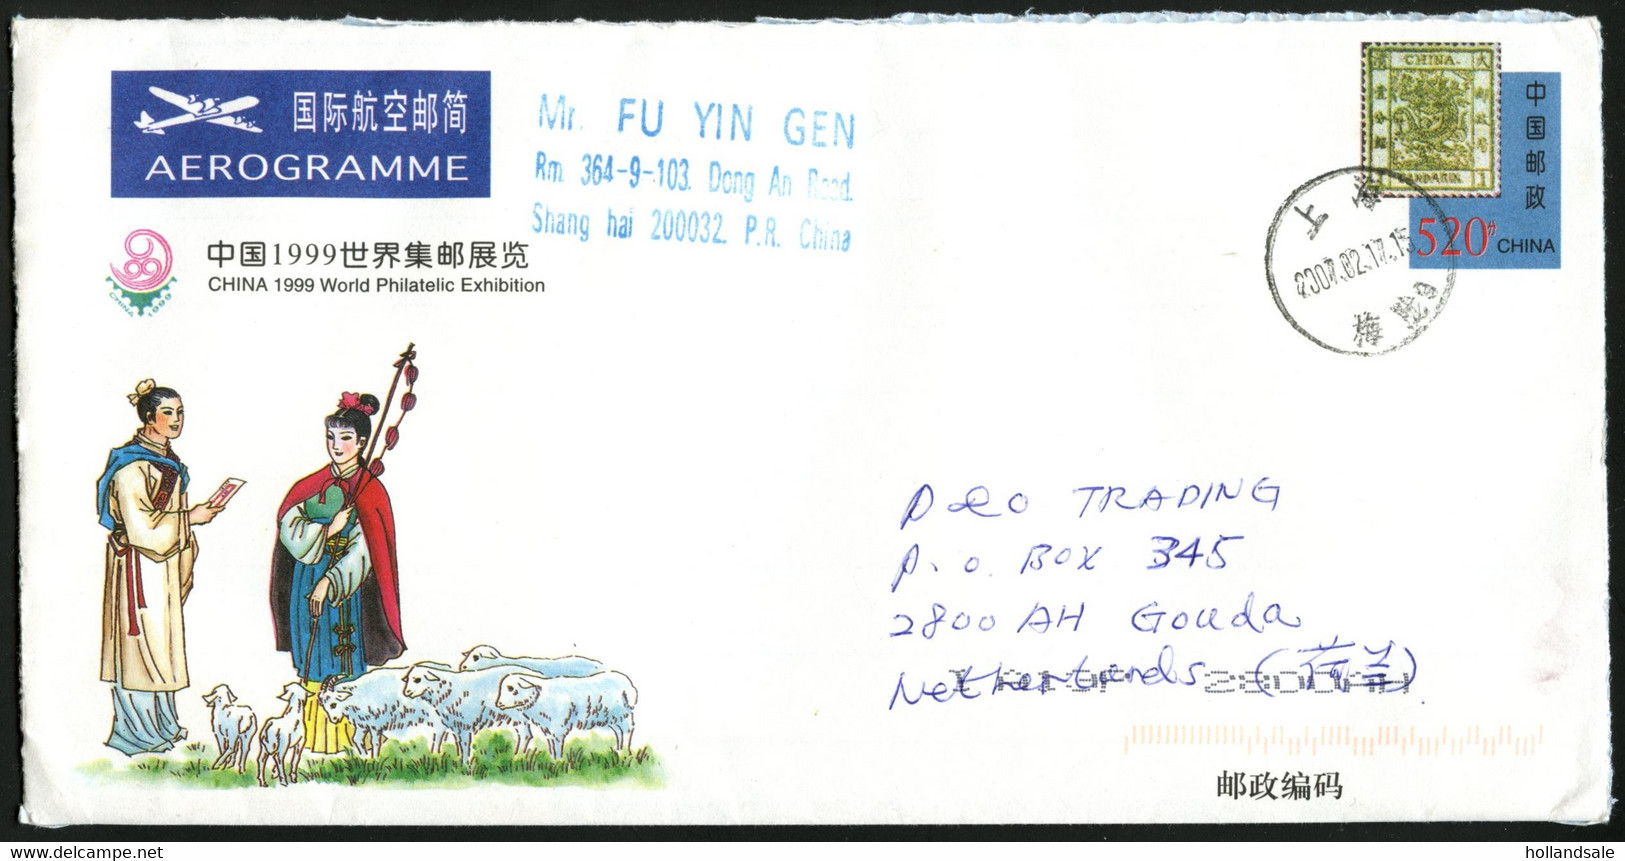 CHINA PRC - Special Aerogrammae Issued For The China 1999 World Philatelic Exhibition. Sent To Netherlands. - Aerograms